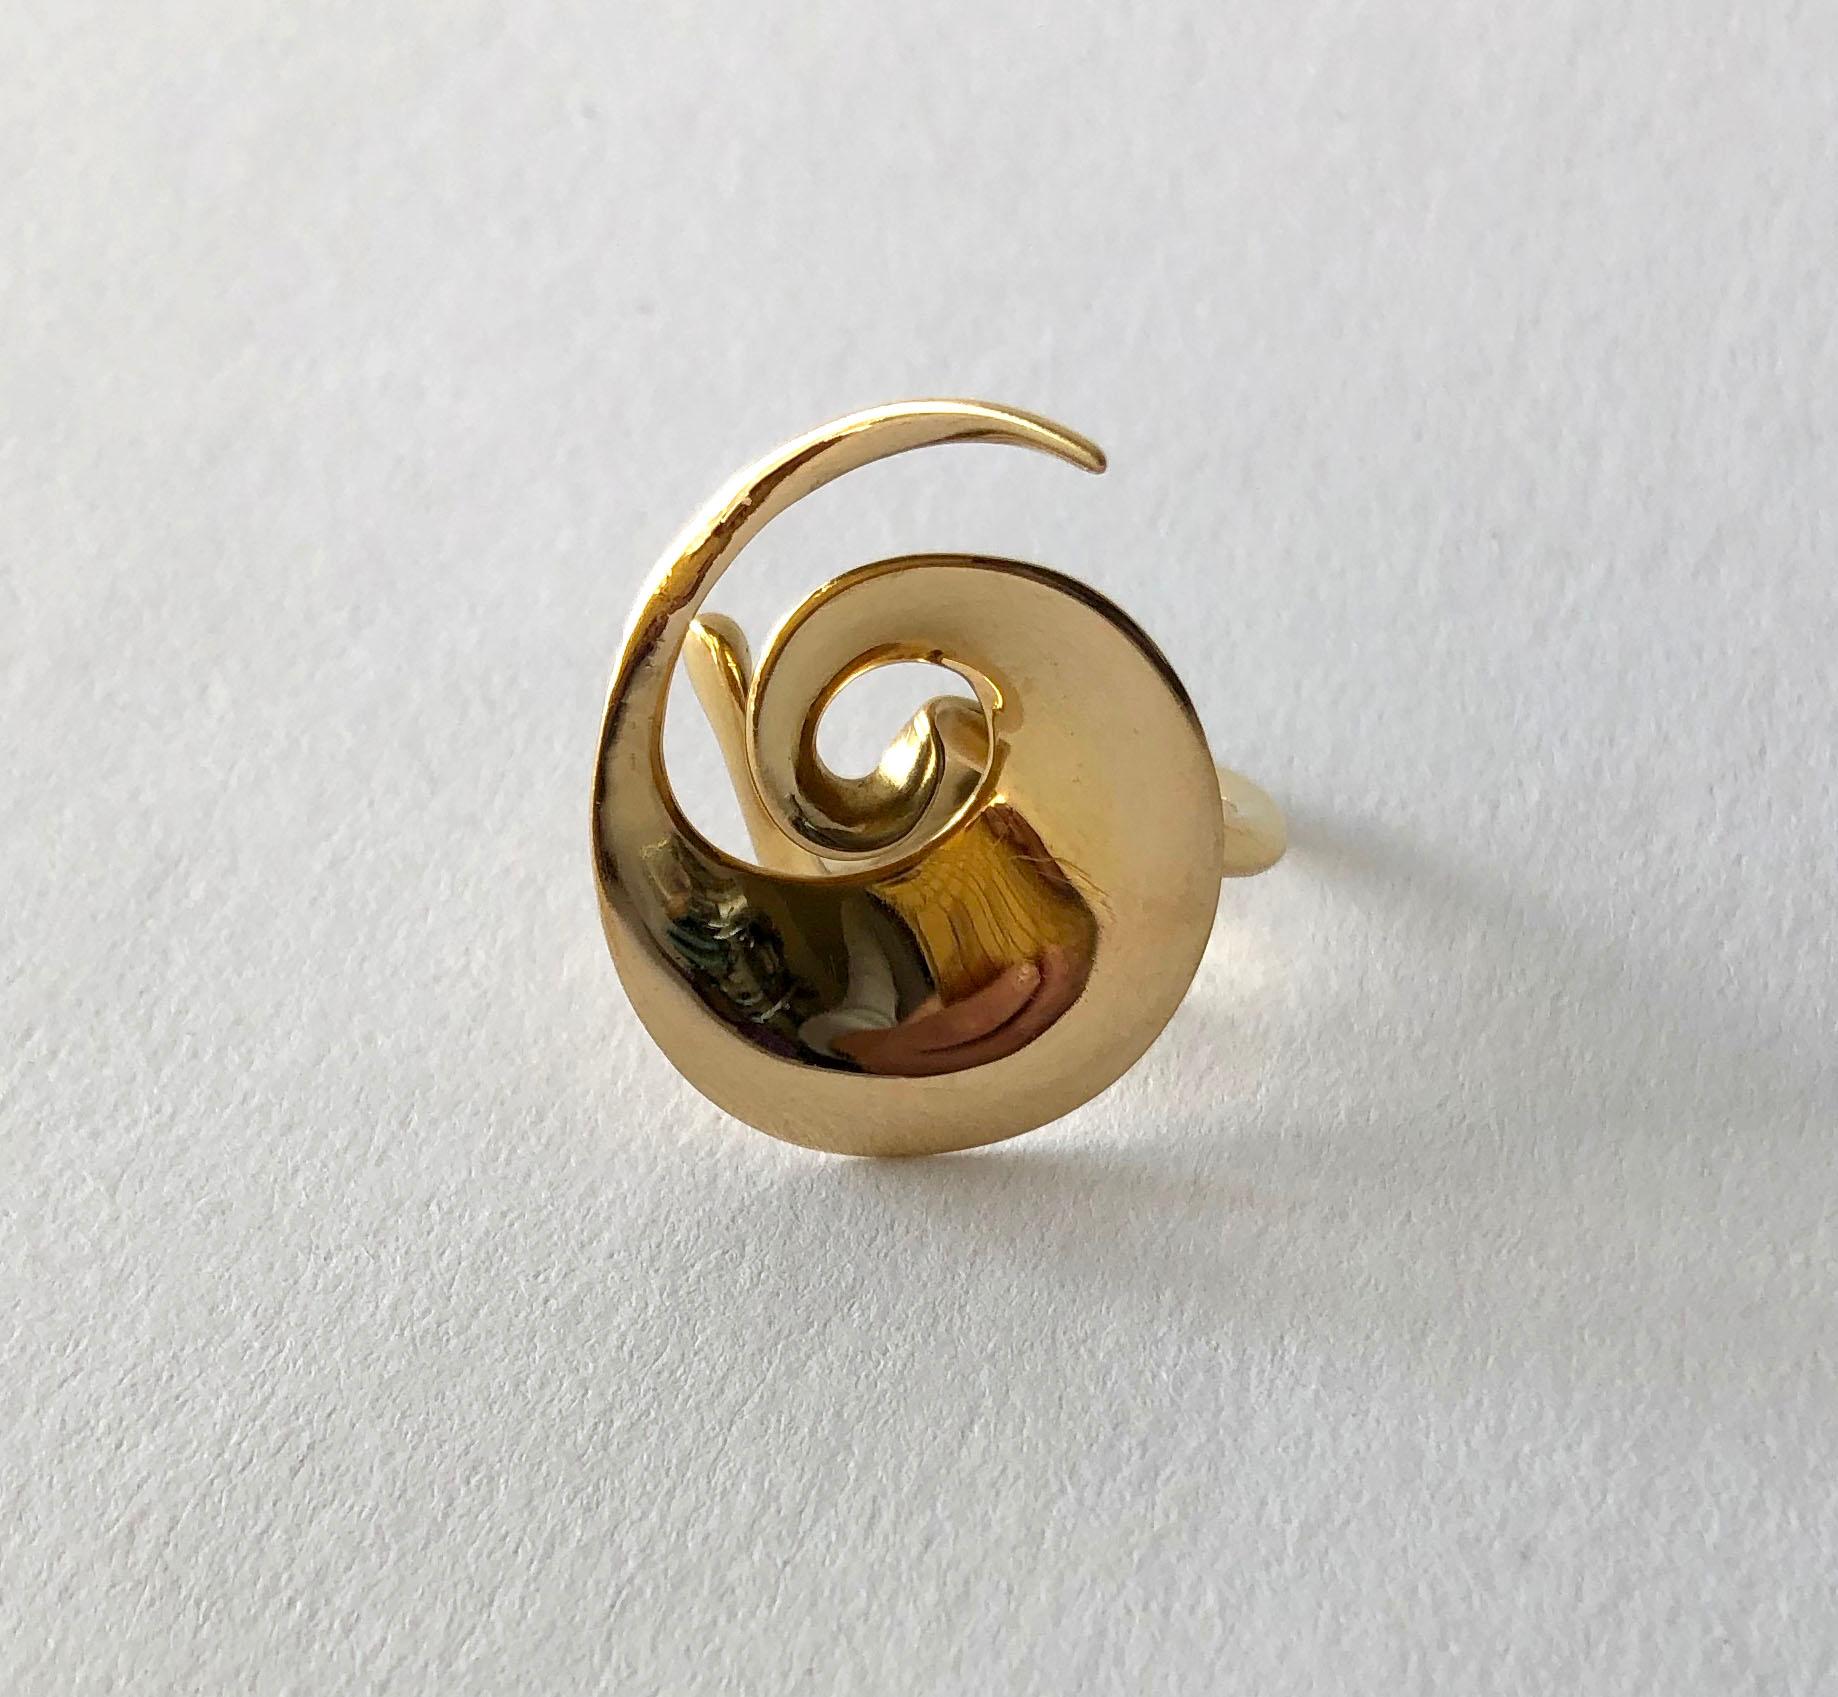 A rare, 18 karat gold spiral ring by Vivianna Torun Bülow-Hübe for Georg Jensen, circa 1950's. Ring is a finger size 6 to 6.5 due to its unusual design.  Signed Torun, George Jensen, 750, Denmark.  In very good vintage condition. 7.5 grams.